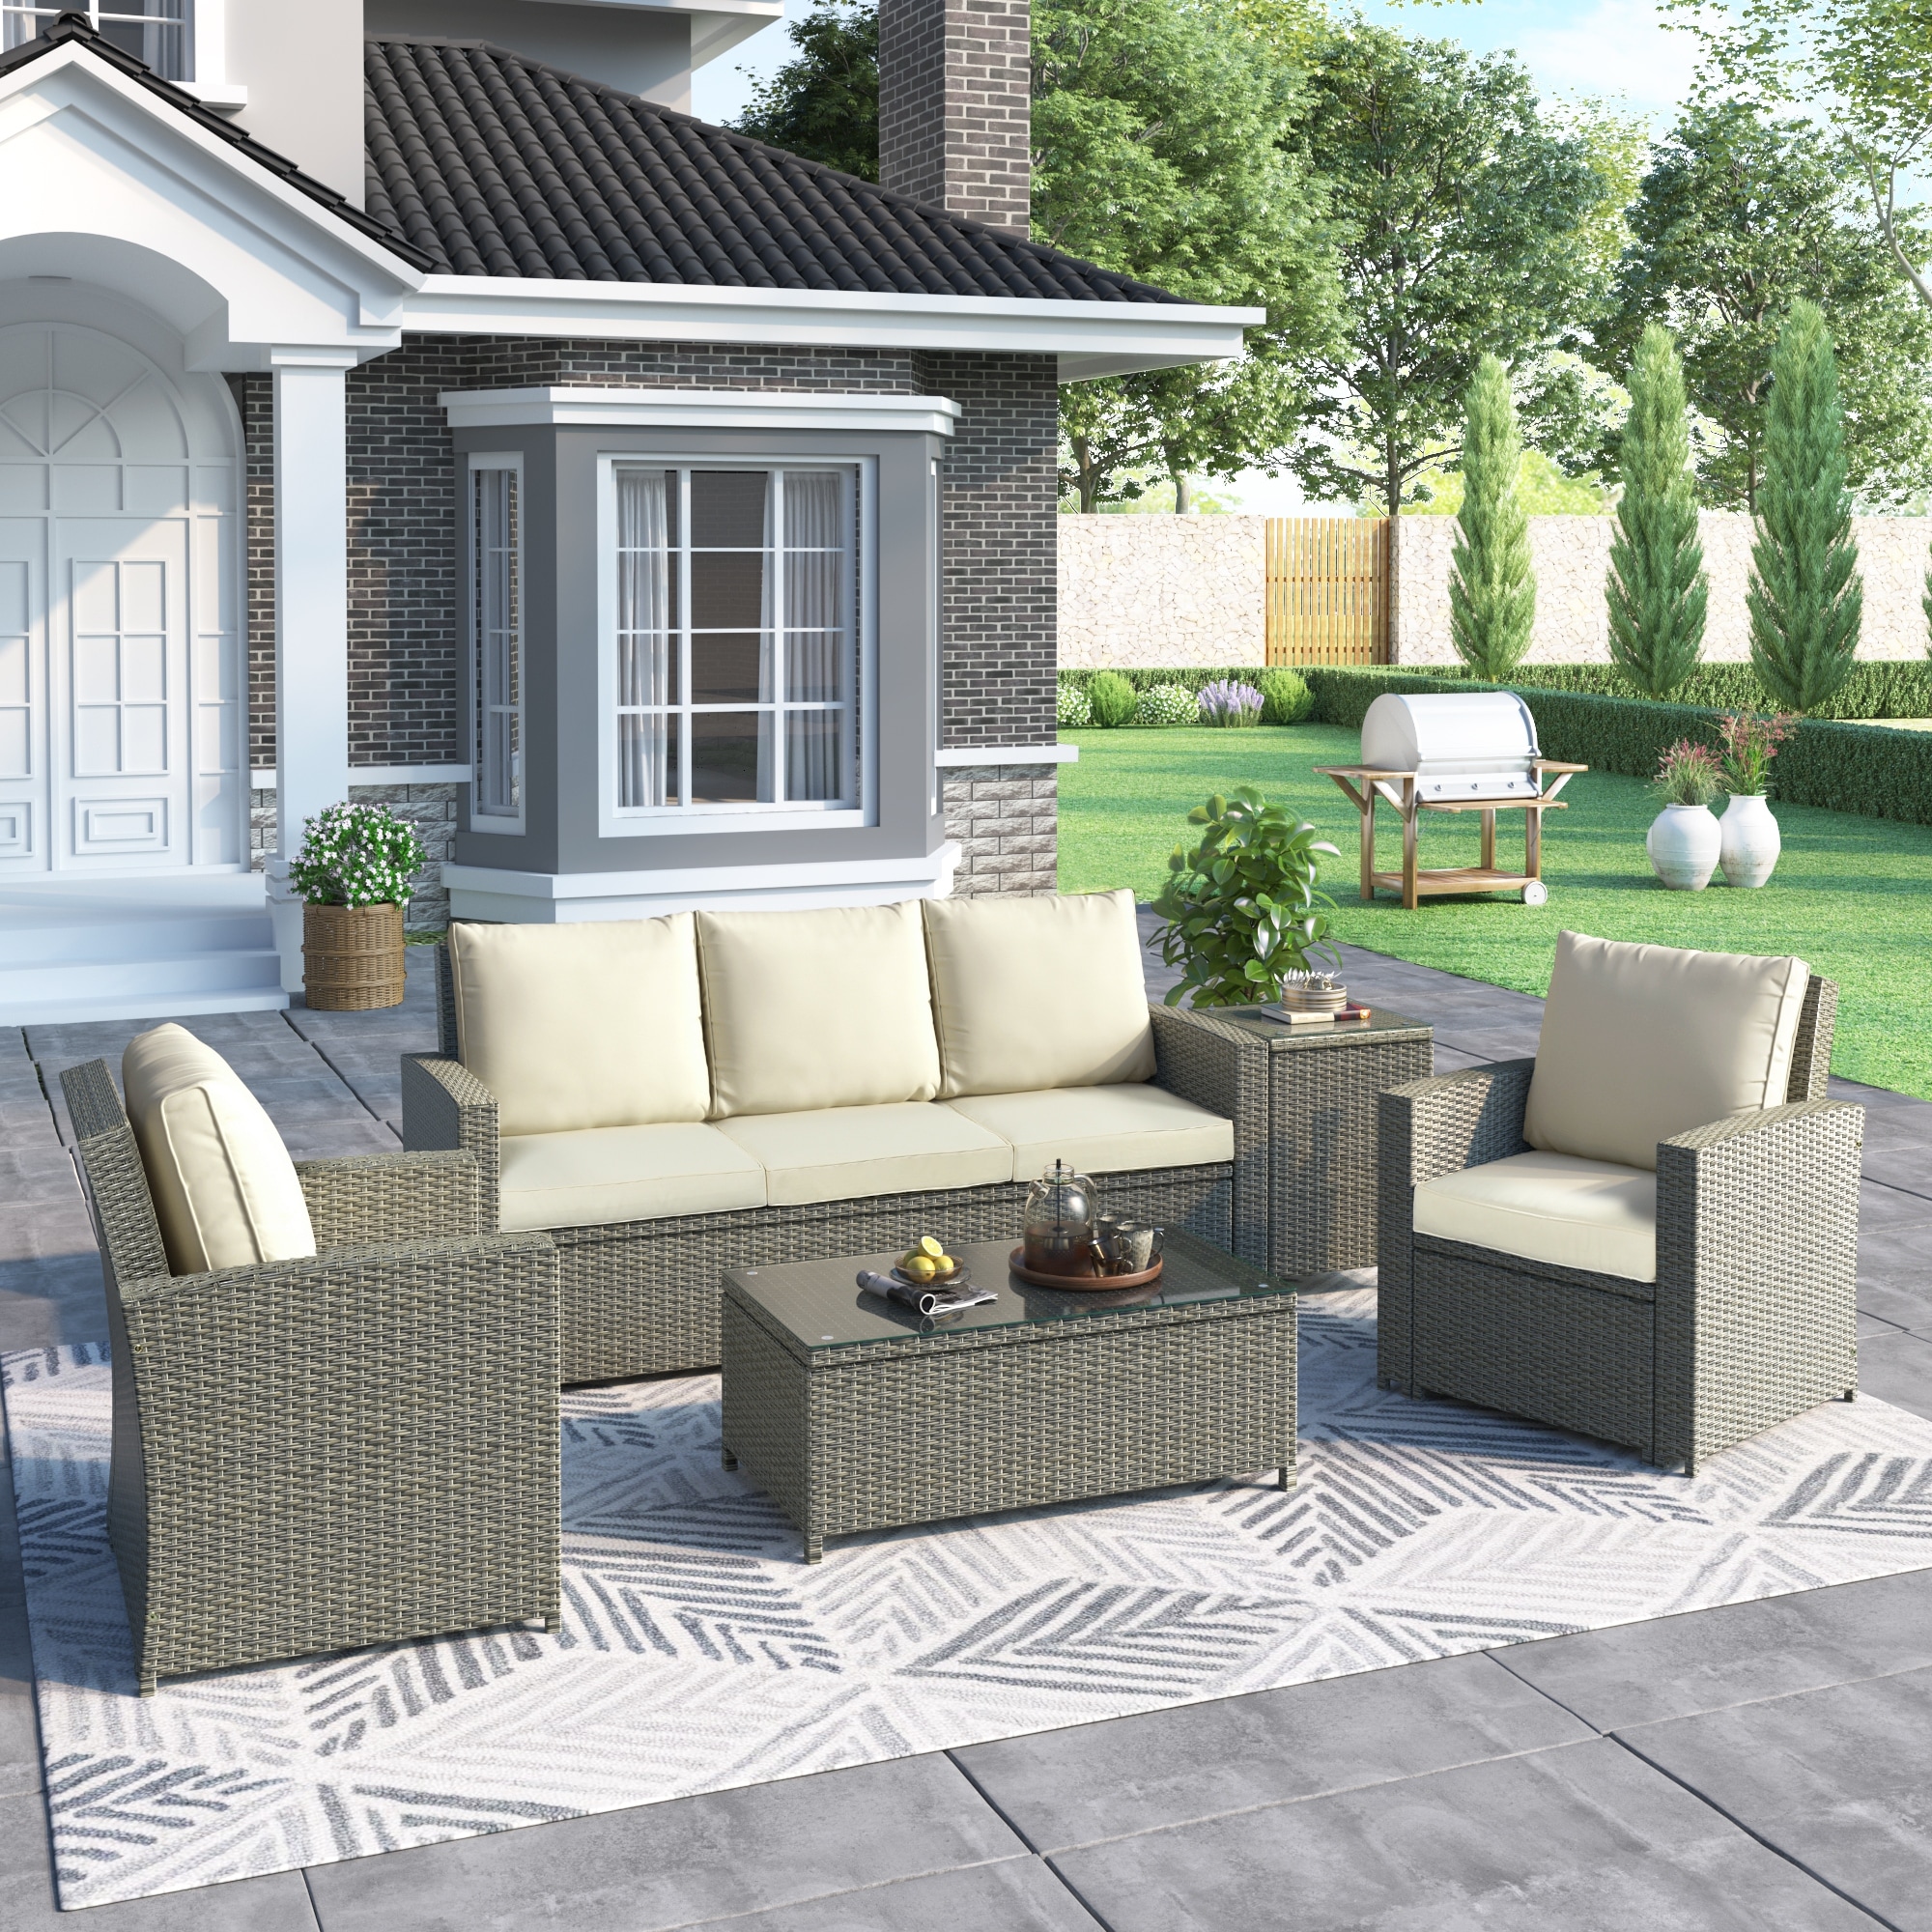 5 Piece Rattan Sectional Seating Group With Patio Outdoor Three Seat Sofa and Arm Chairs Sets